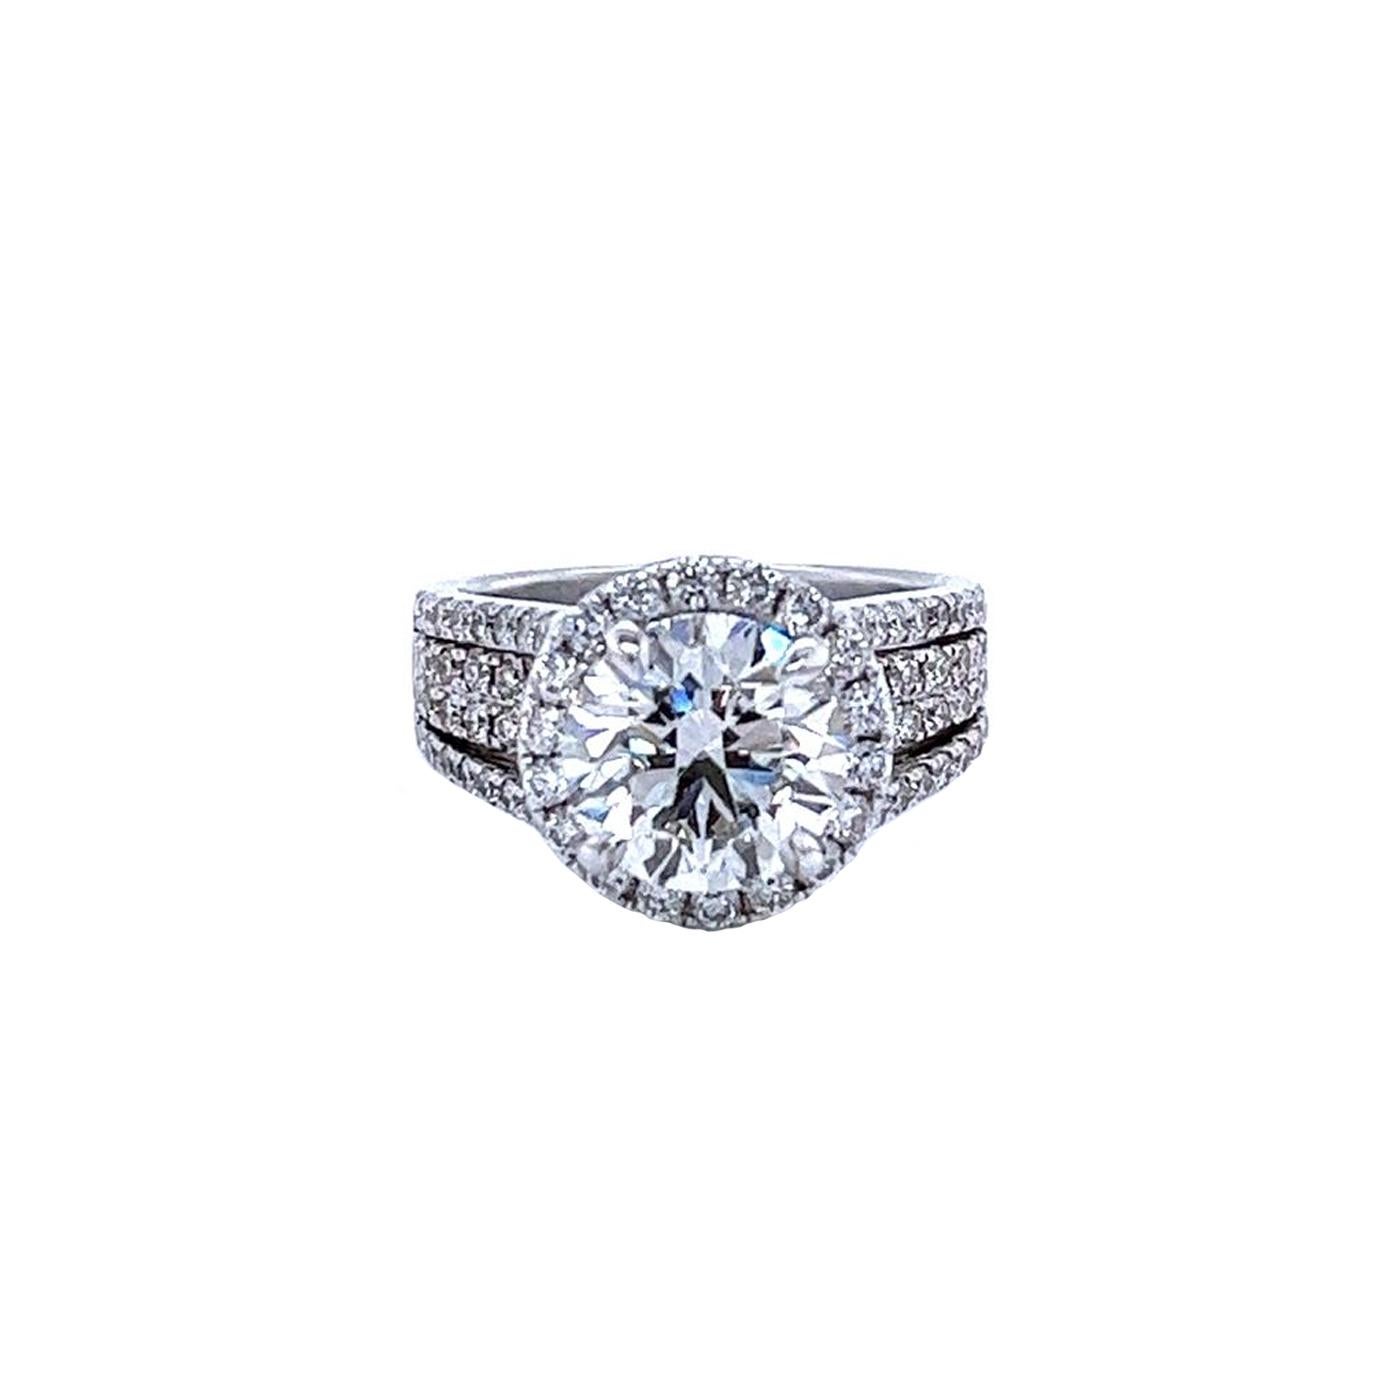 Modernist 3.01ct GIA Round Diamond Ring Accented with Natural Pave Diamonds 18K White Gold For Sale